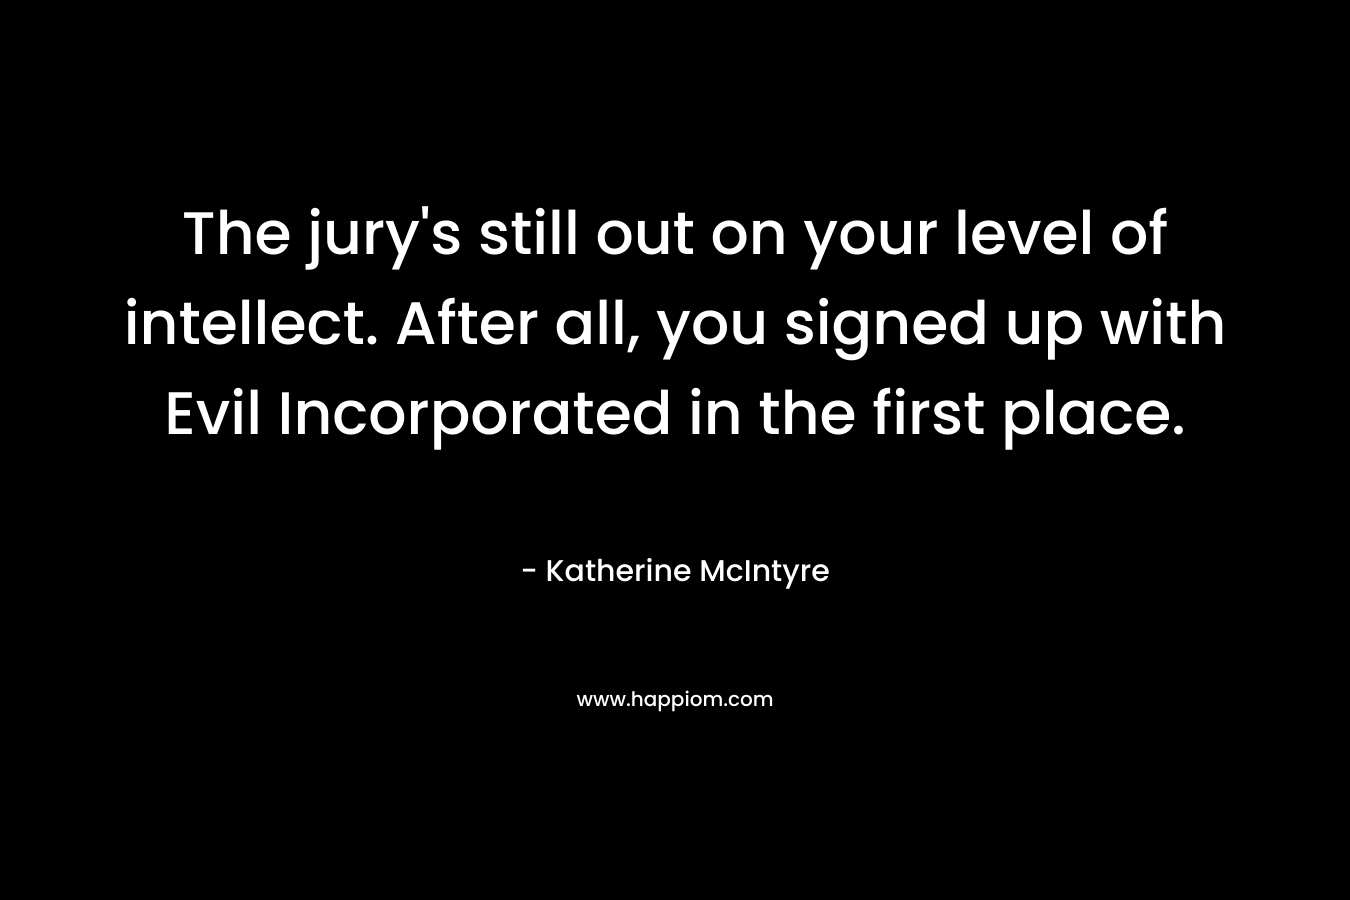 The jury’s still out on your level of intellect. After all, you signed up with Evil Incorporated in the first place. – Katherine McIntyre